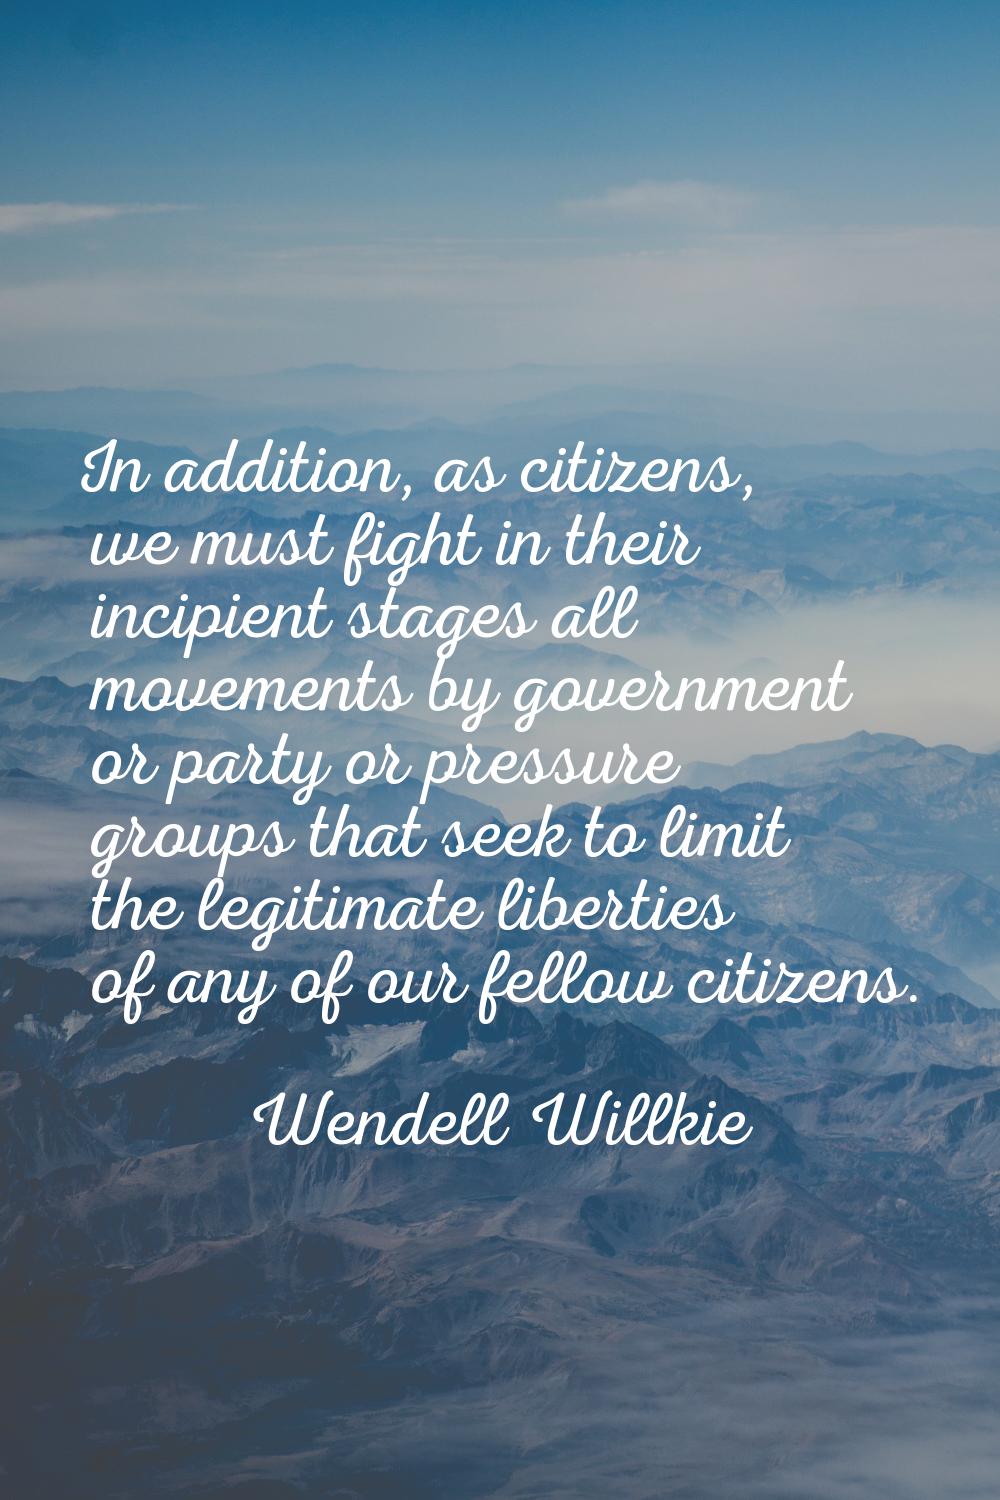 In addition, as citizens, we must fight in their incipient stages all movements by government or pa